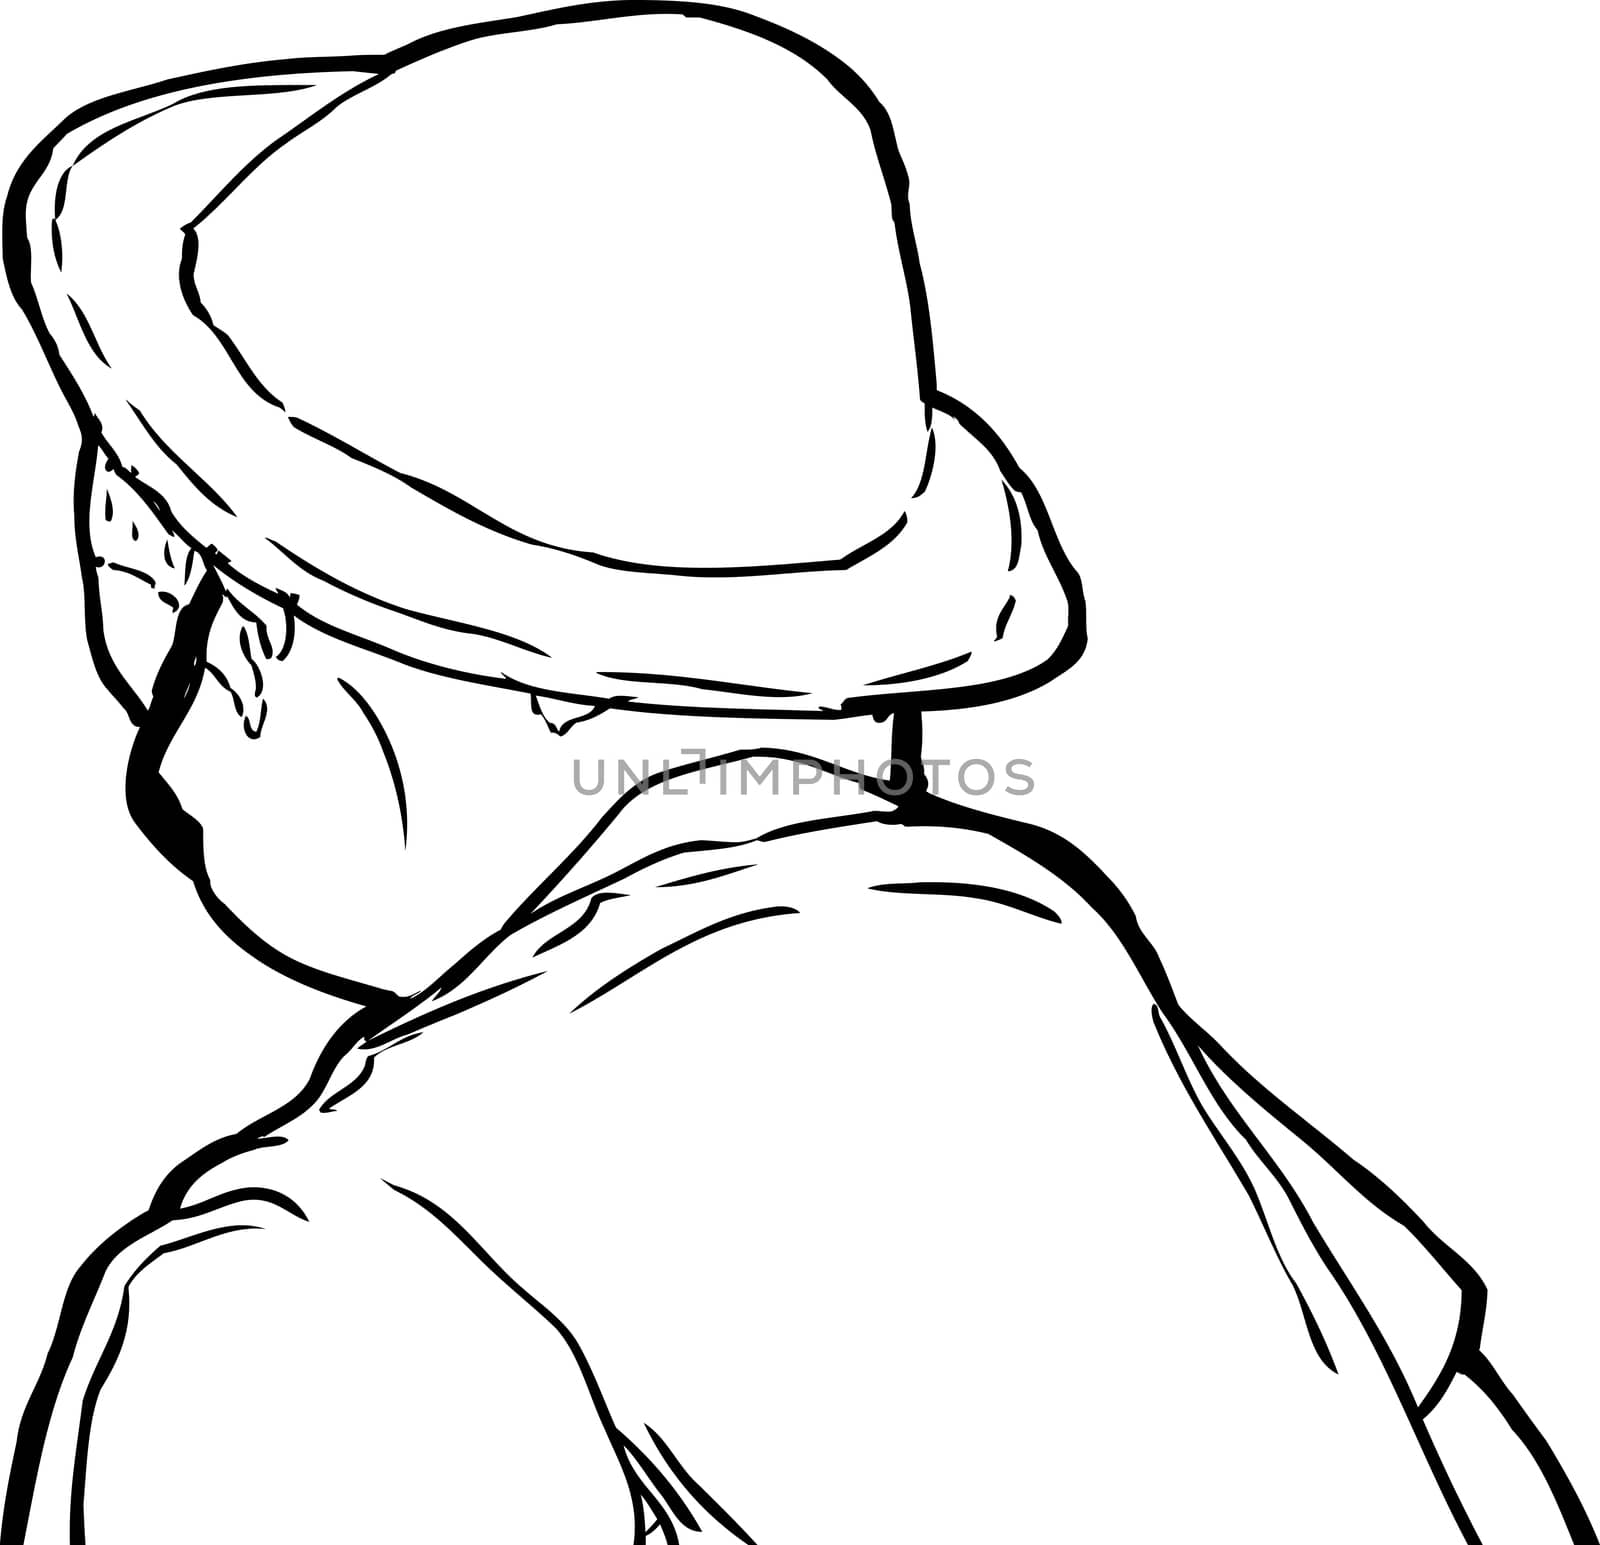 Outline sketch of mature man in hat and sunglasses from rear view looking downward